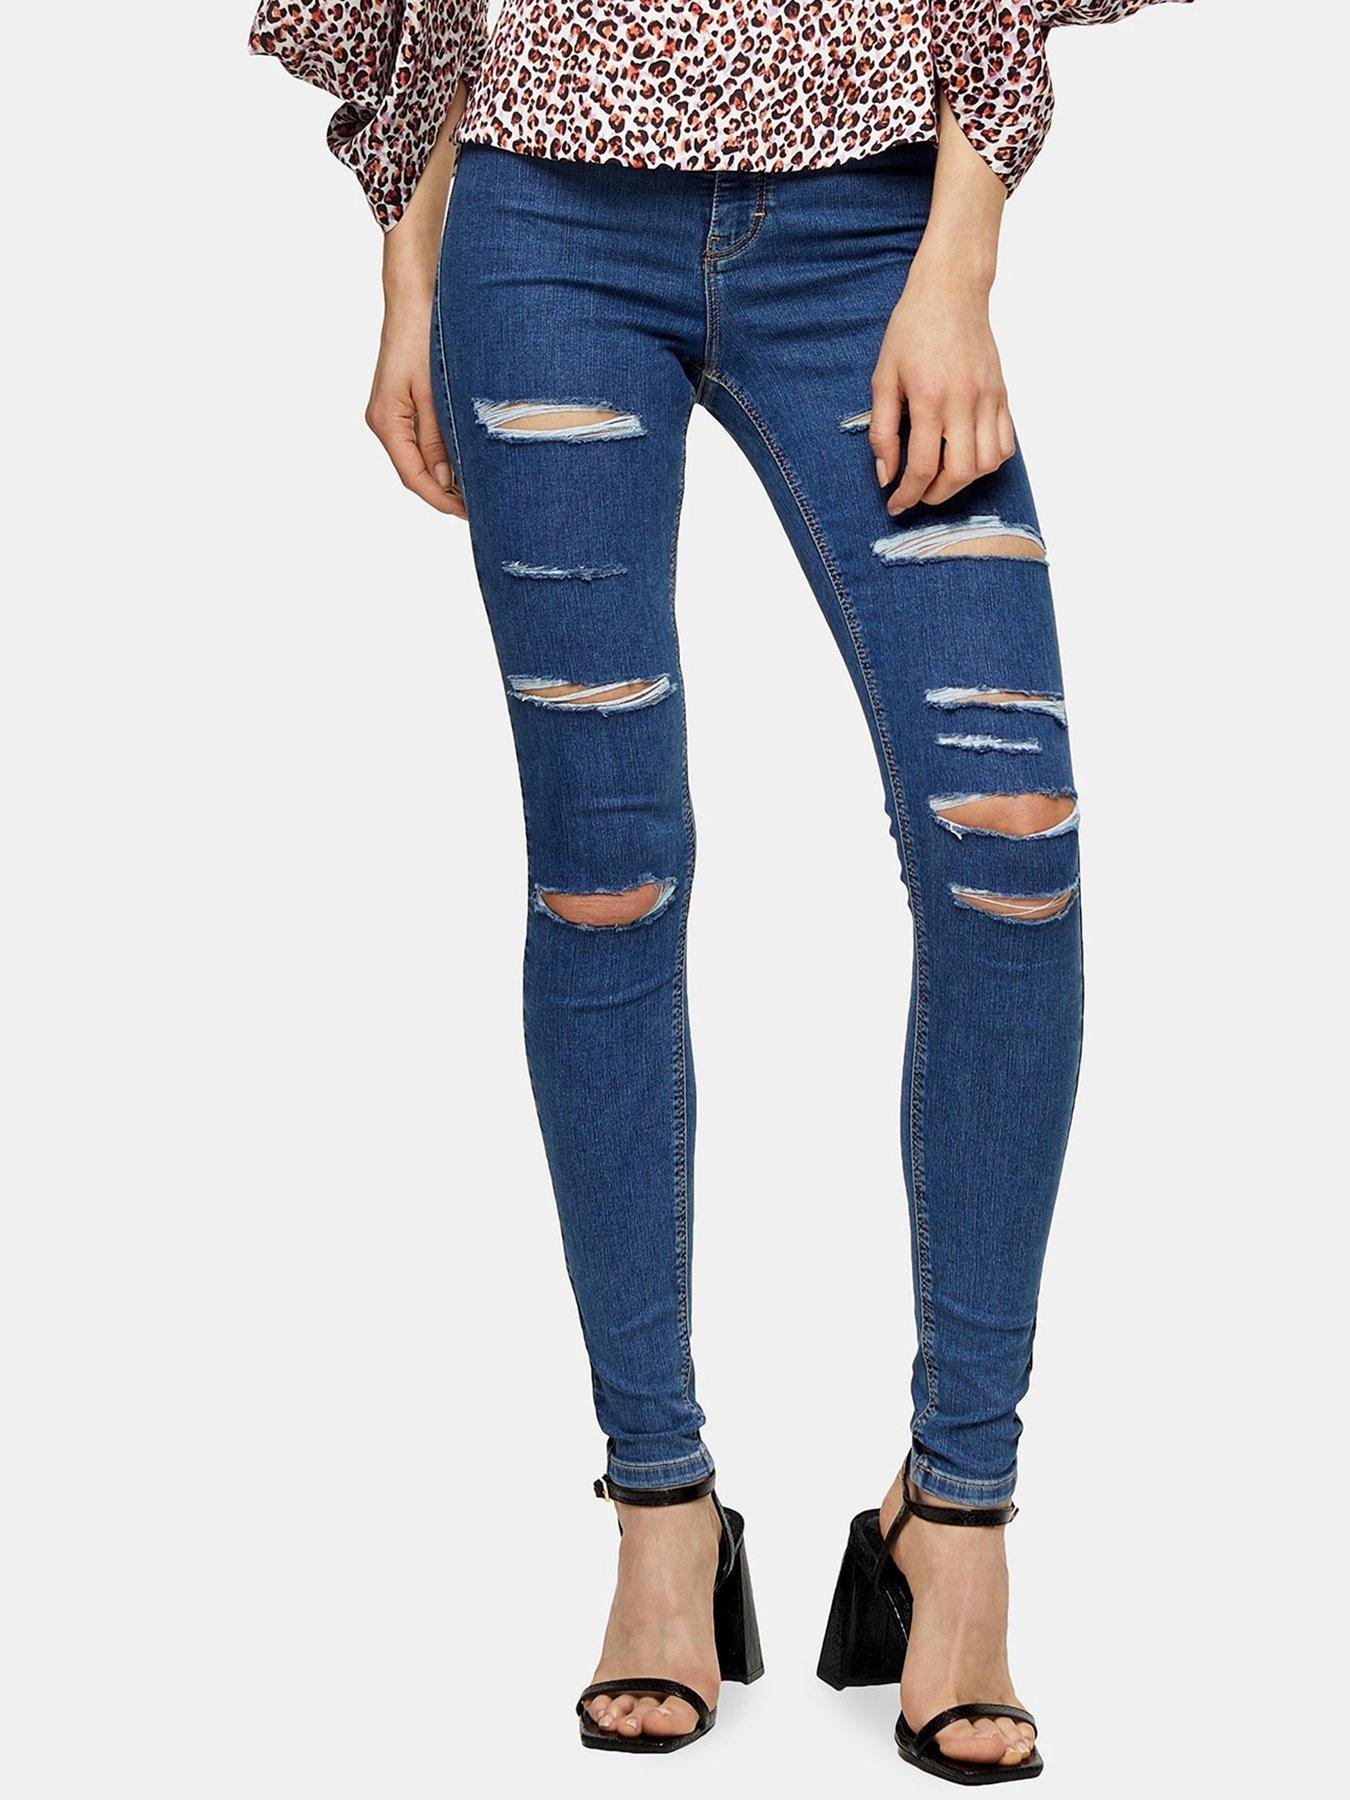 super ripped blue jeans